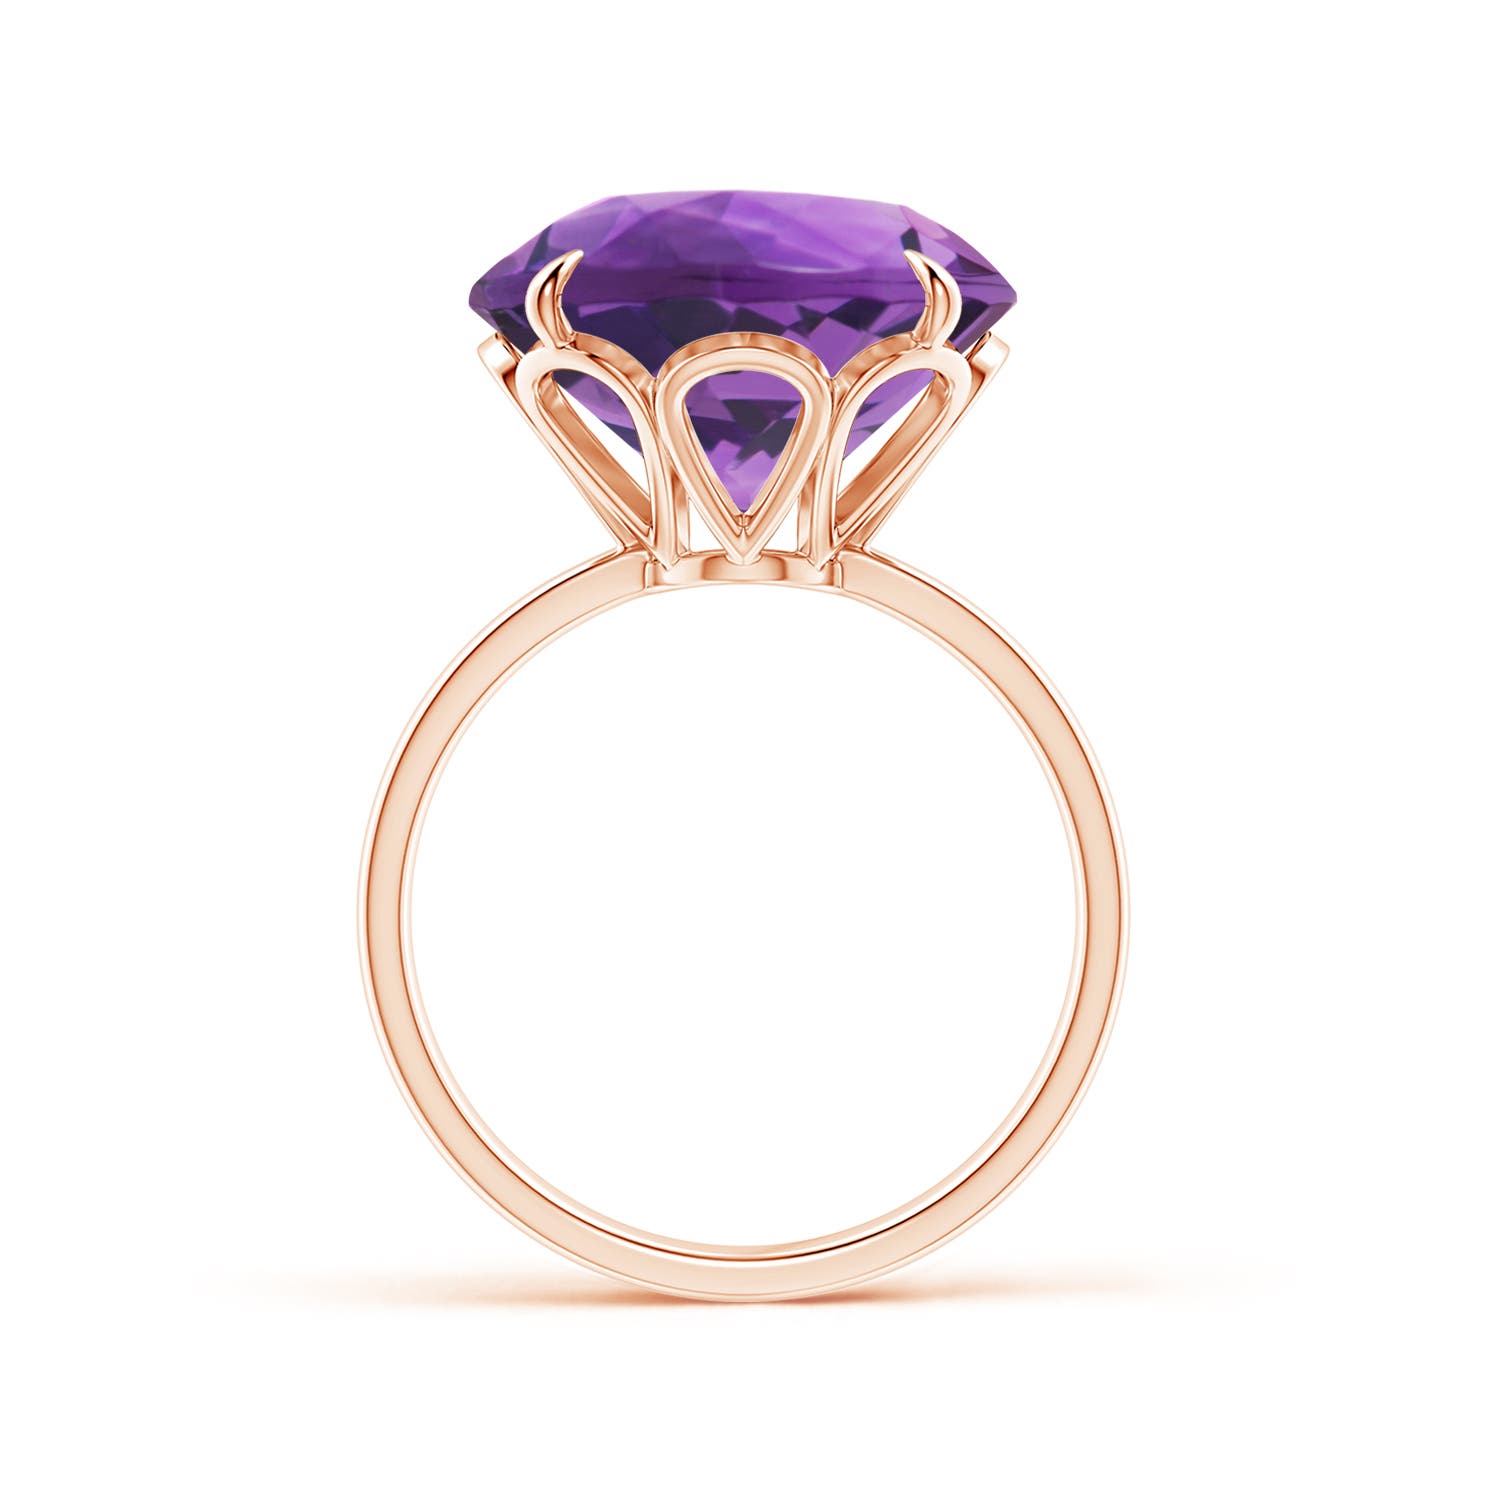 AAA - Amethyst / 8.5 CT / 14 KT Rose Gold